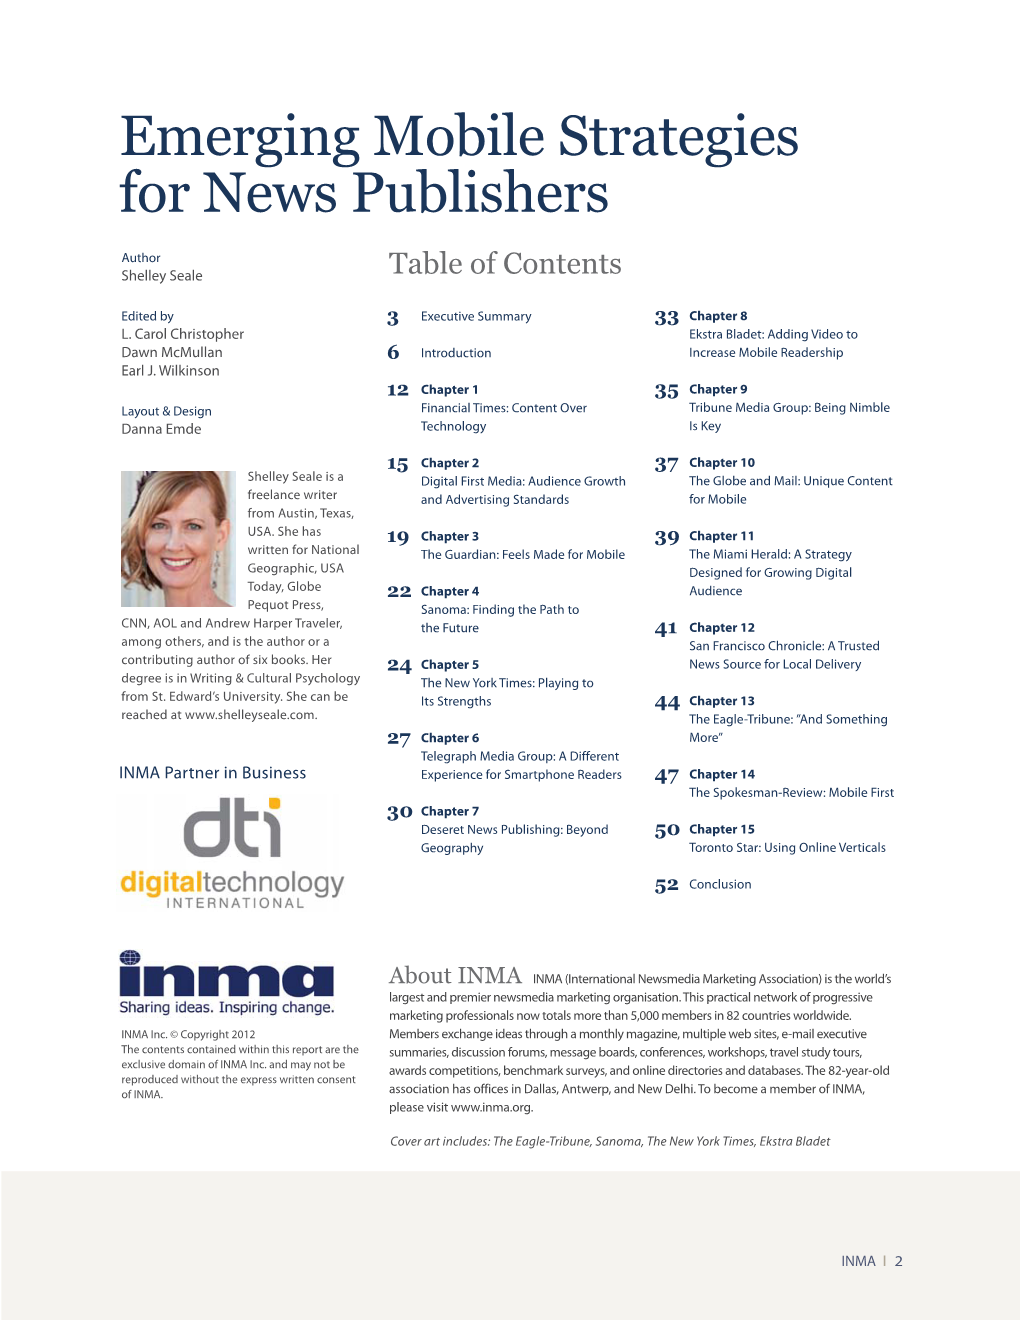 Emerging Mobile Strategies for News Publishers